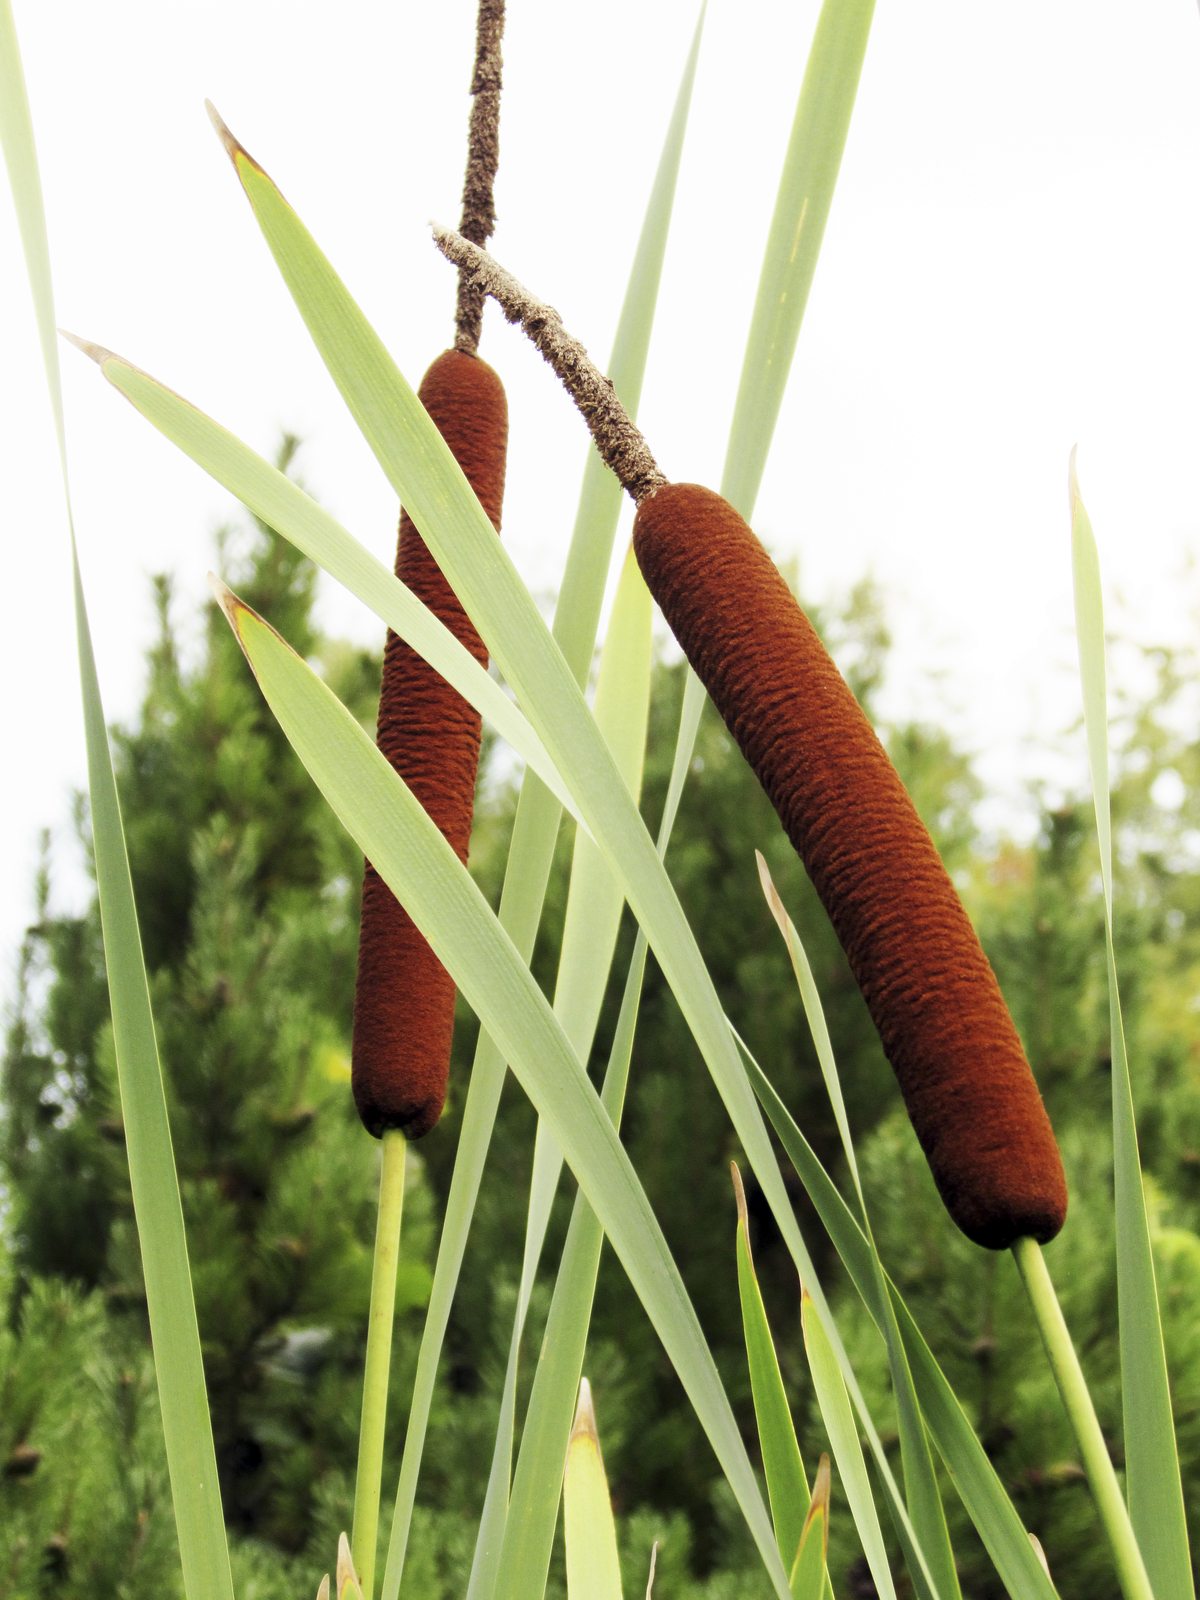 Edible Parts Of Cattail Plants: What Parts Of Cattail Are Edible